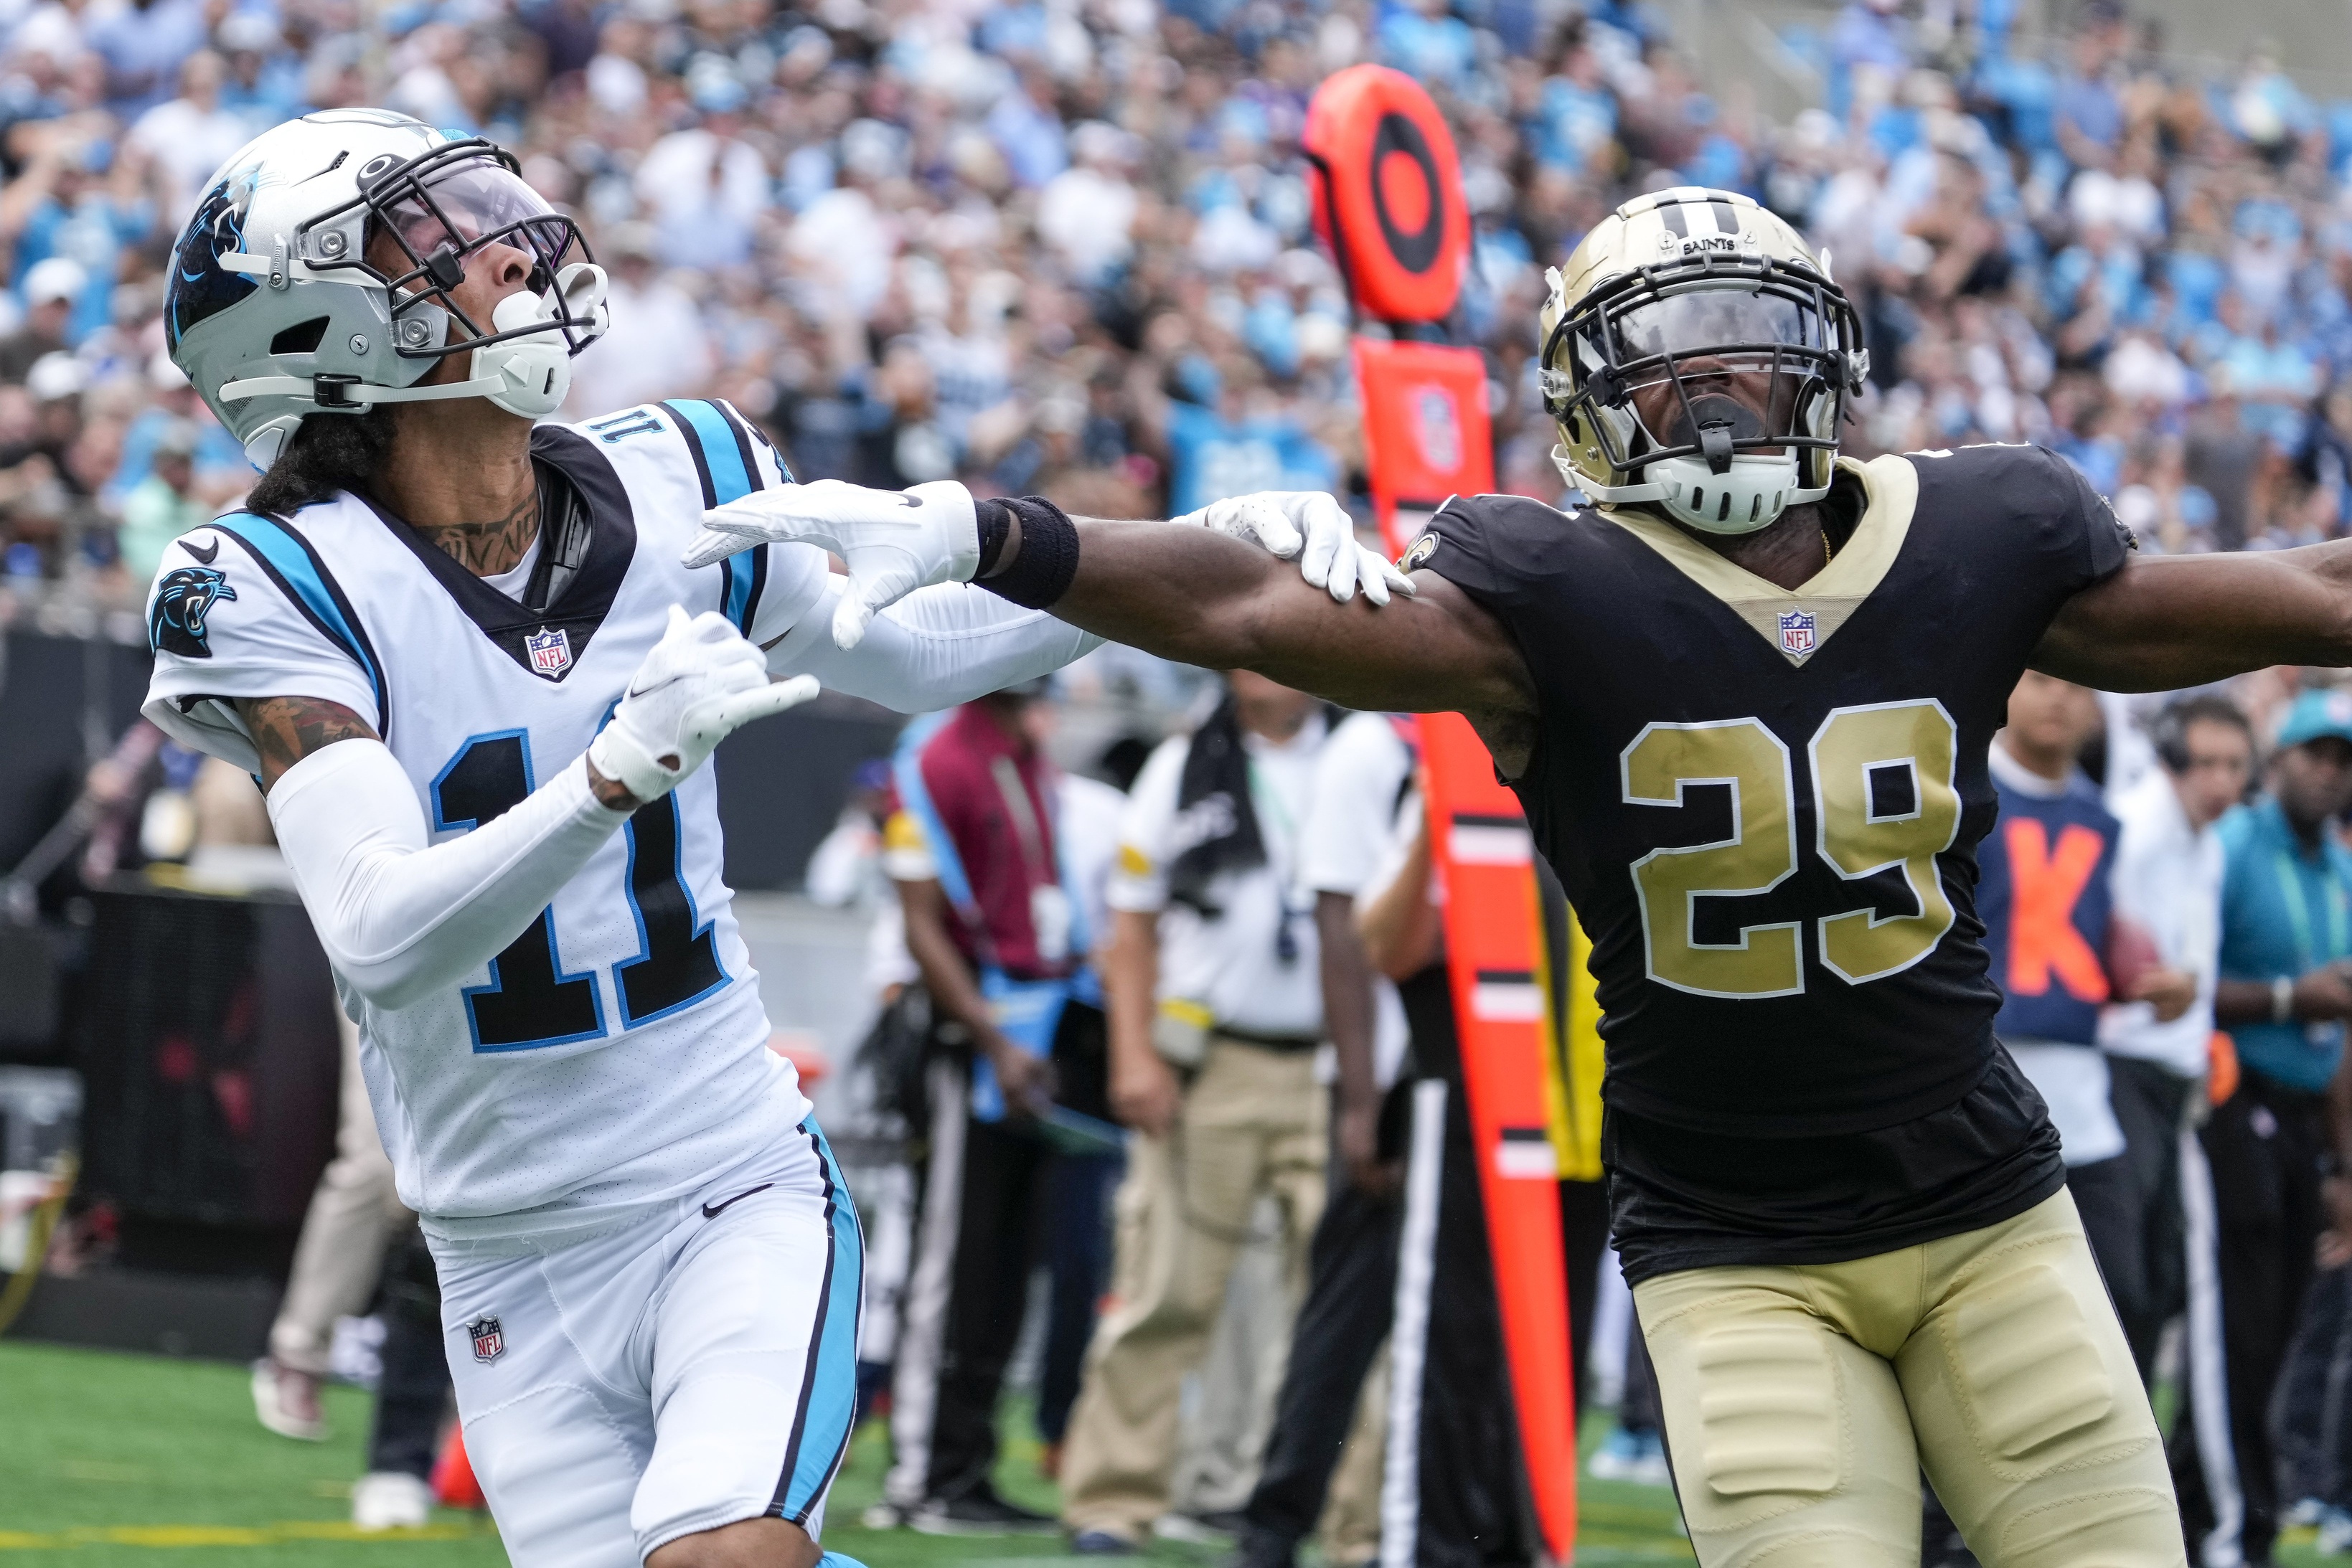 Sep 19, 2021; Carolina Panthers wide receiver Robby Anderson (11) and New Orleans Saints cornerback Paulson Adebo (29) vie for the reception. Mandatory Credit: Jim Dedmon-USA TODAY